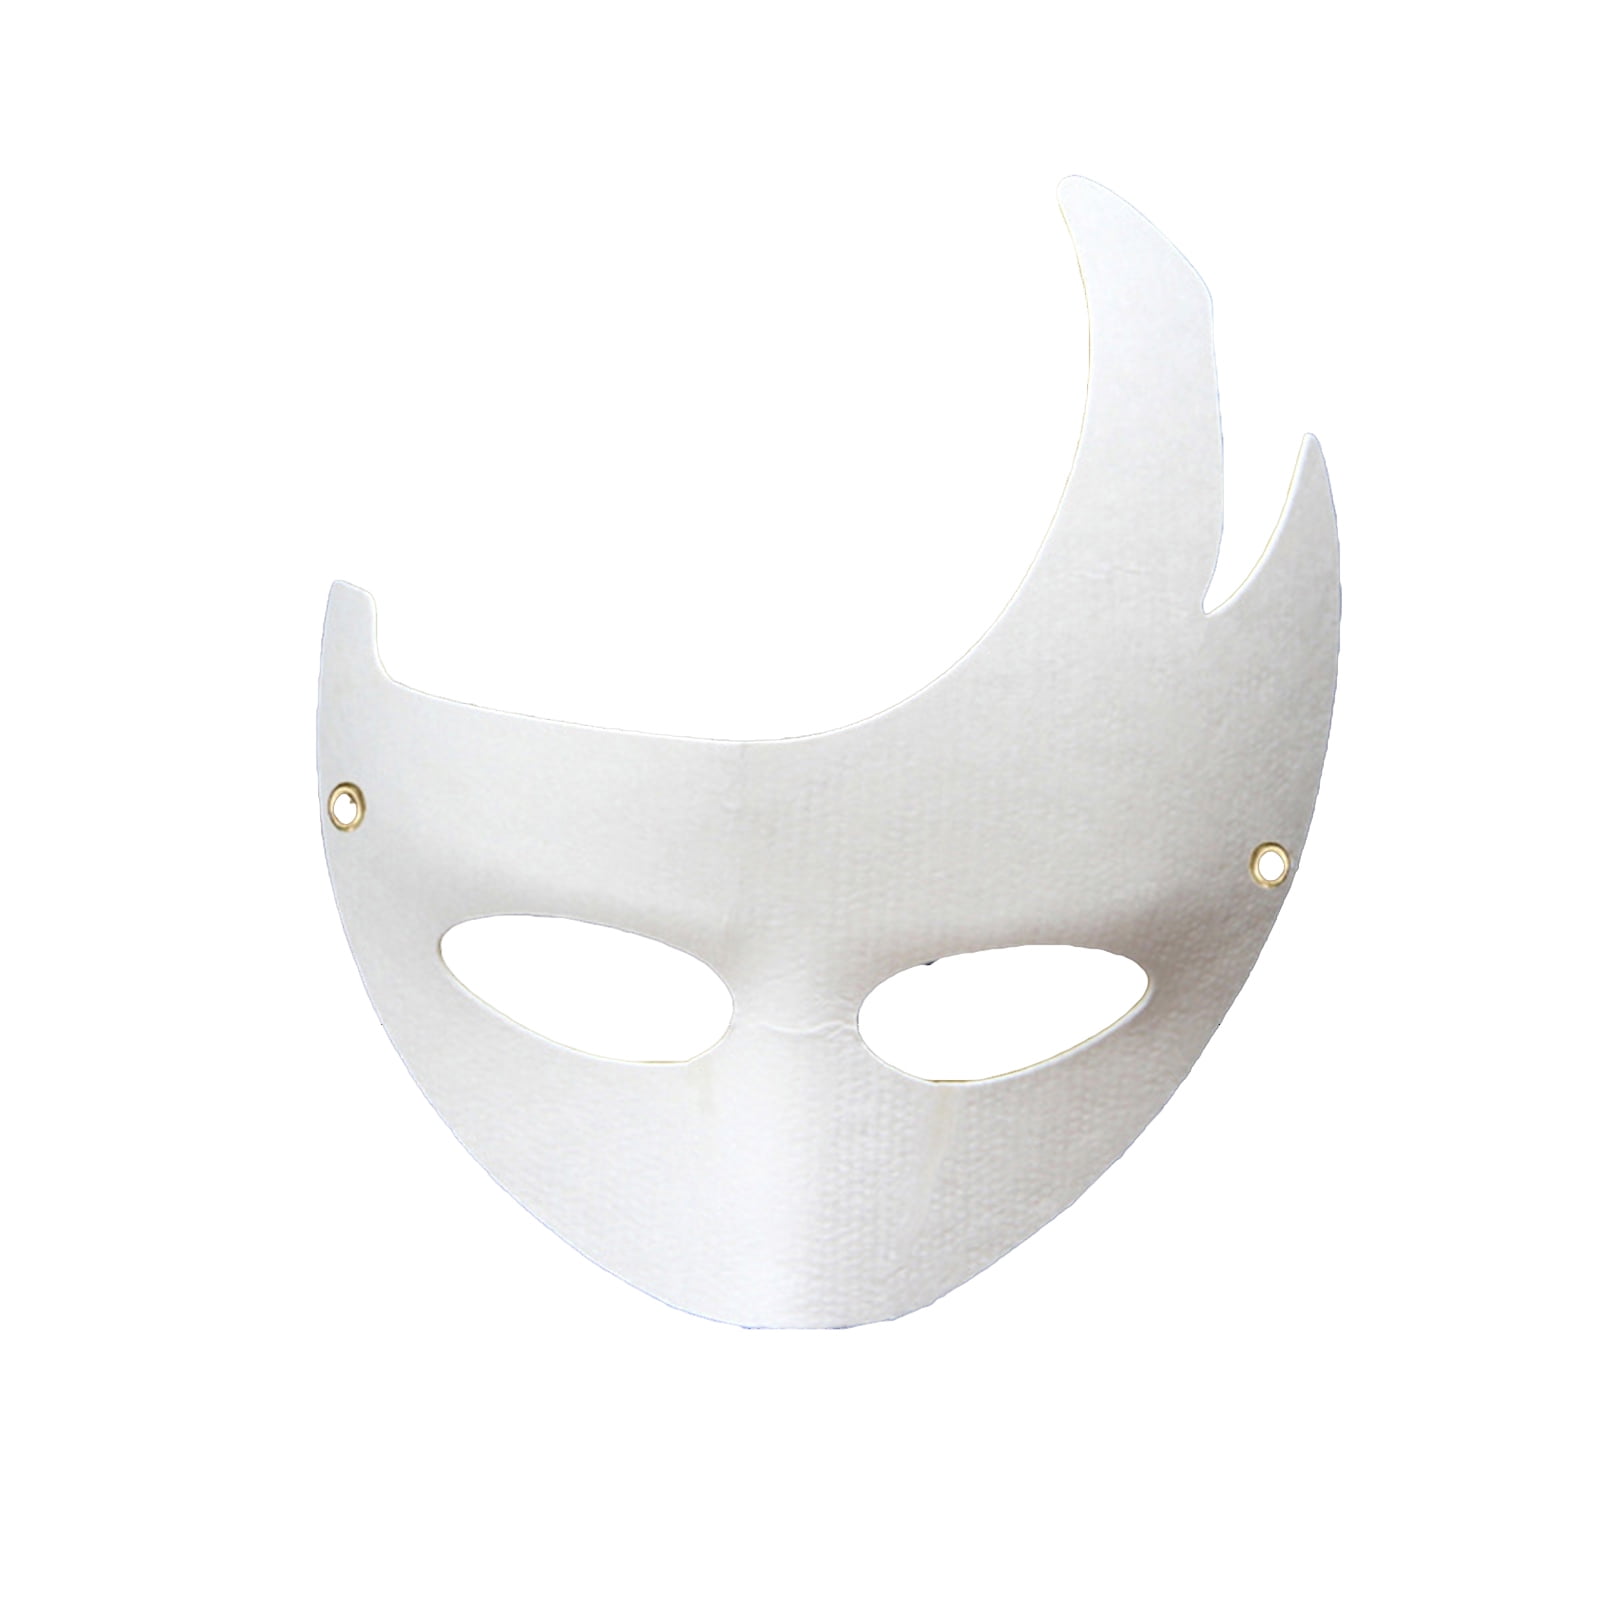 Gadpiparty 10 Pcs White Mask DIY Blank Painting Mask Paper Full Face Mask  for Cosplay Masquerade Hip Hop Dance Party Favors